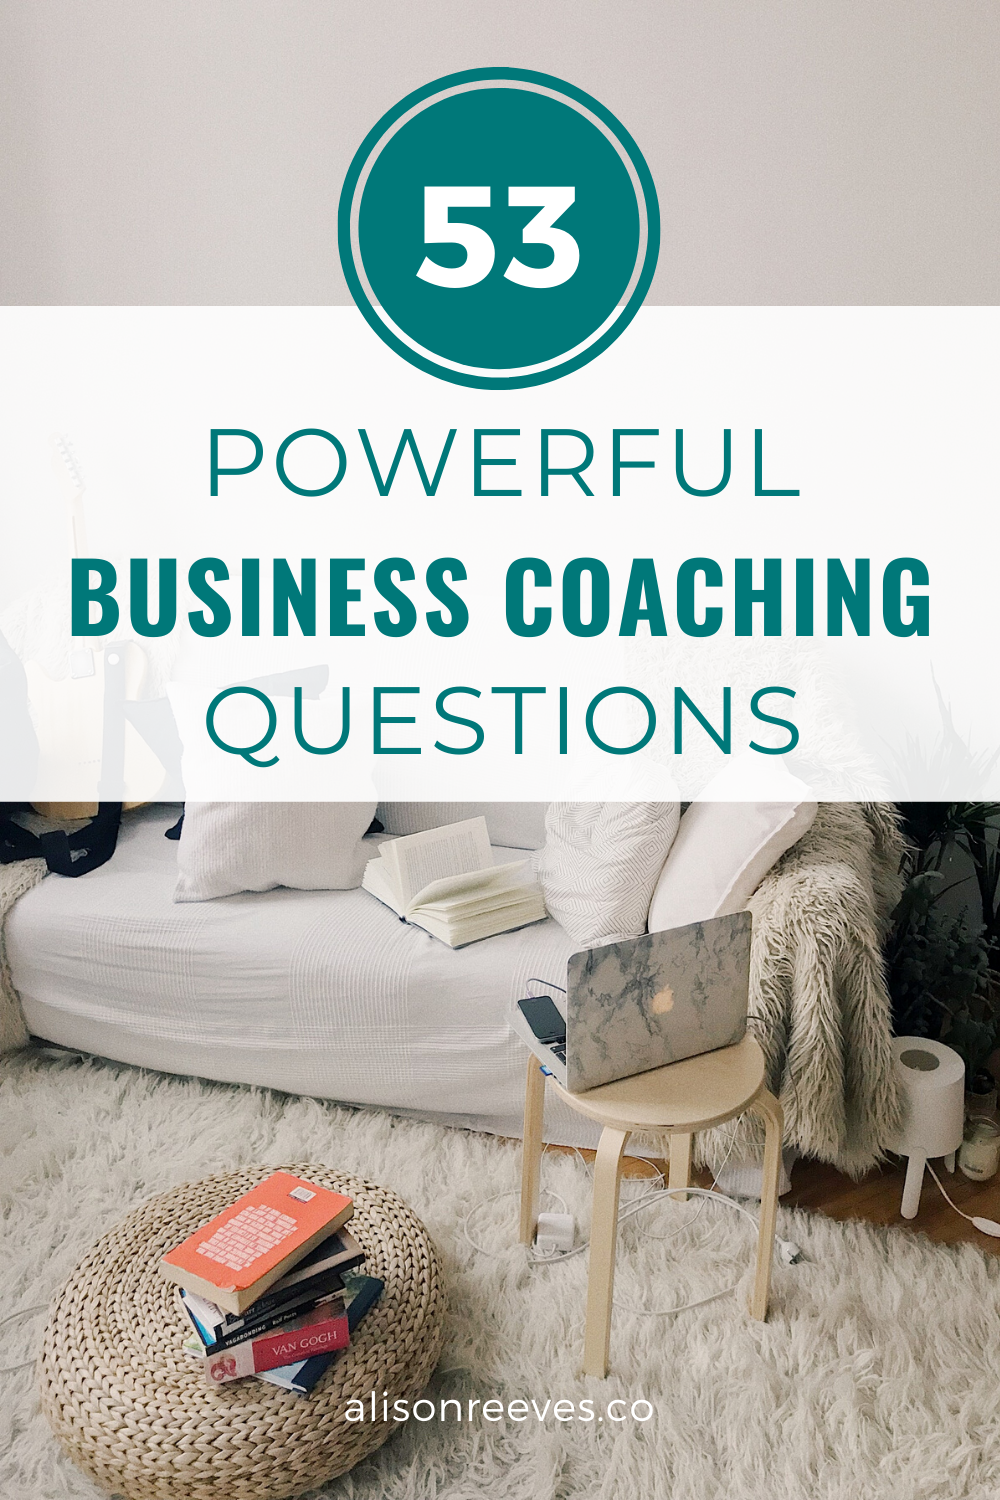 53 Powerful Business Coaching Questions | Alison Reeves Coaching Tips